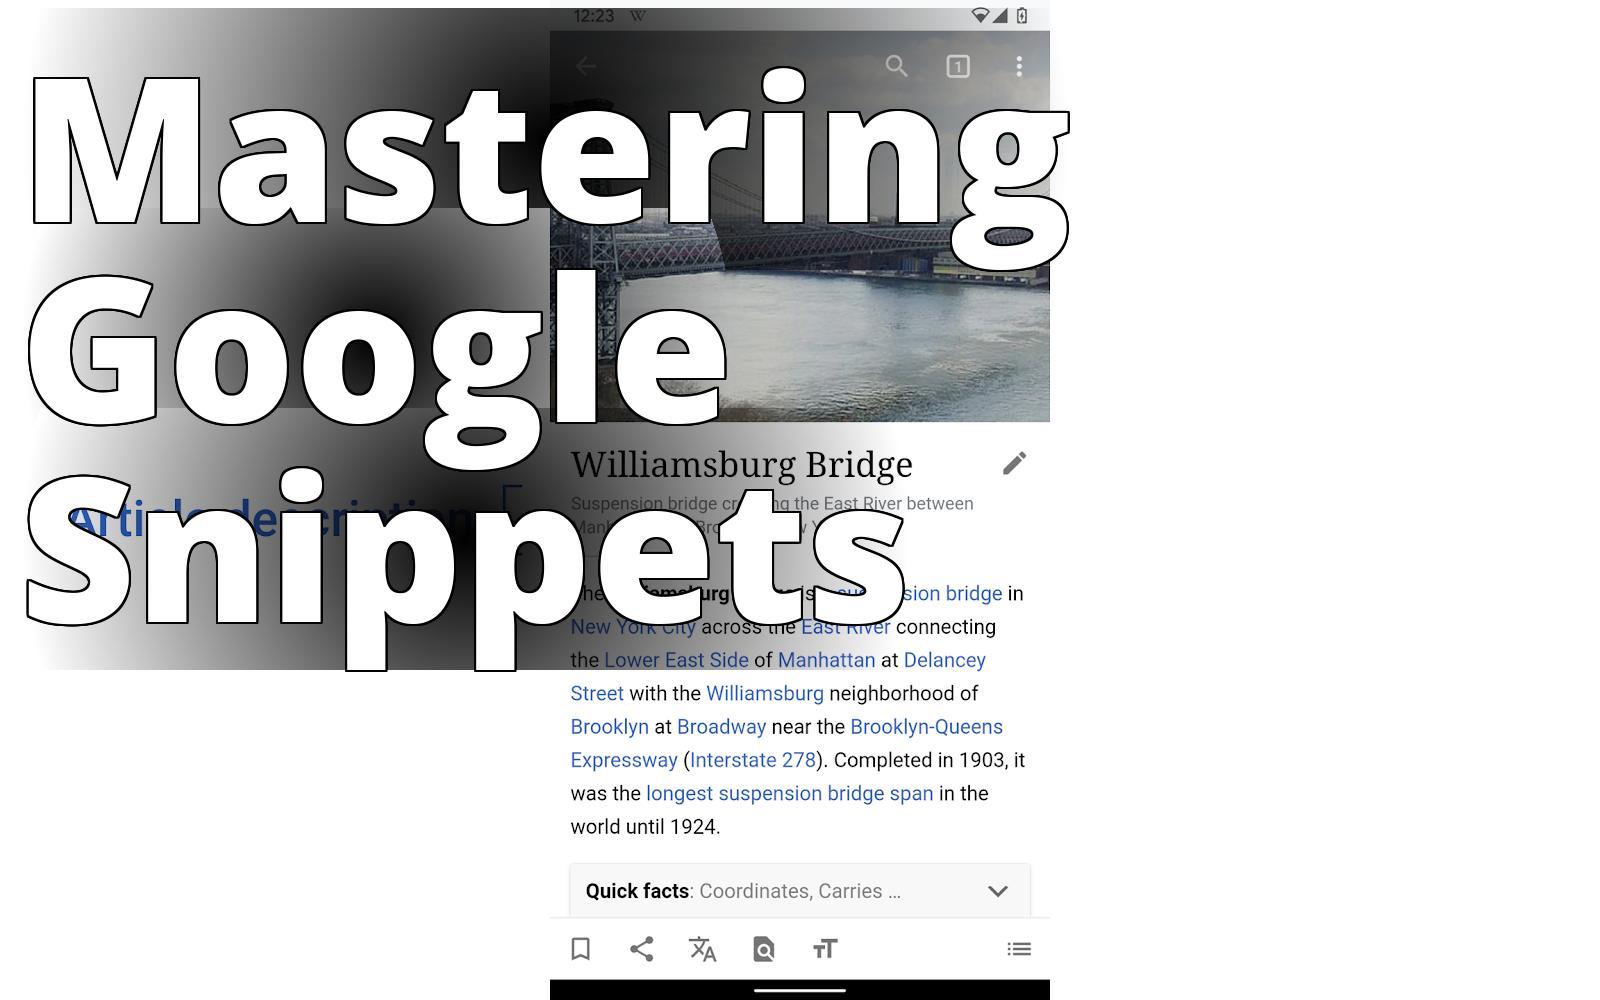 Article descriptions on Android - a screenshot of a bridge with the words'art description '